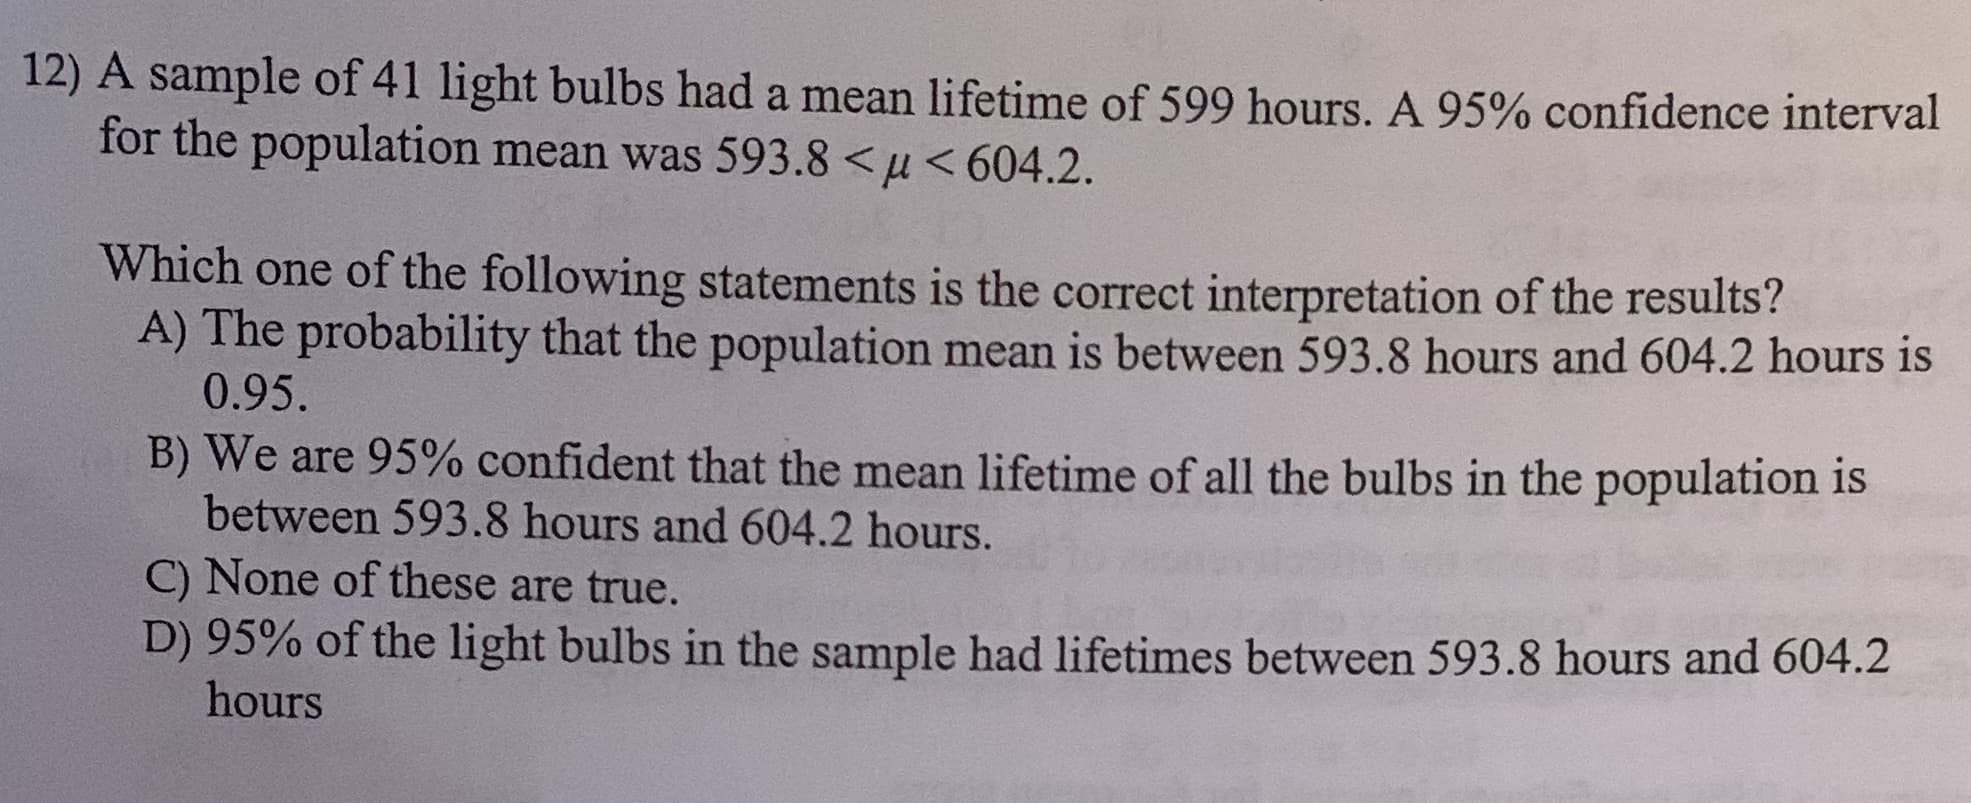 12) A sample of 41 light bulbs had a mean lifetime of 599 hours. A 95% confidence interval
for the population mean was 593.8 <u<604.2
Which one of the following statements is the correct interpretation of the results?
A) The probability that the population mean is between 593.8 hours and 604.2 hours is
0.95.
B) We are 95% confident that the mean lifetime of all the bulbs in the population is
between 593.8 hours and 604.2 hours.
C) None of these are true.
D) 95% of the light bulbs in the sample had lifetimes between 593.8 hours and 604.2
hours
